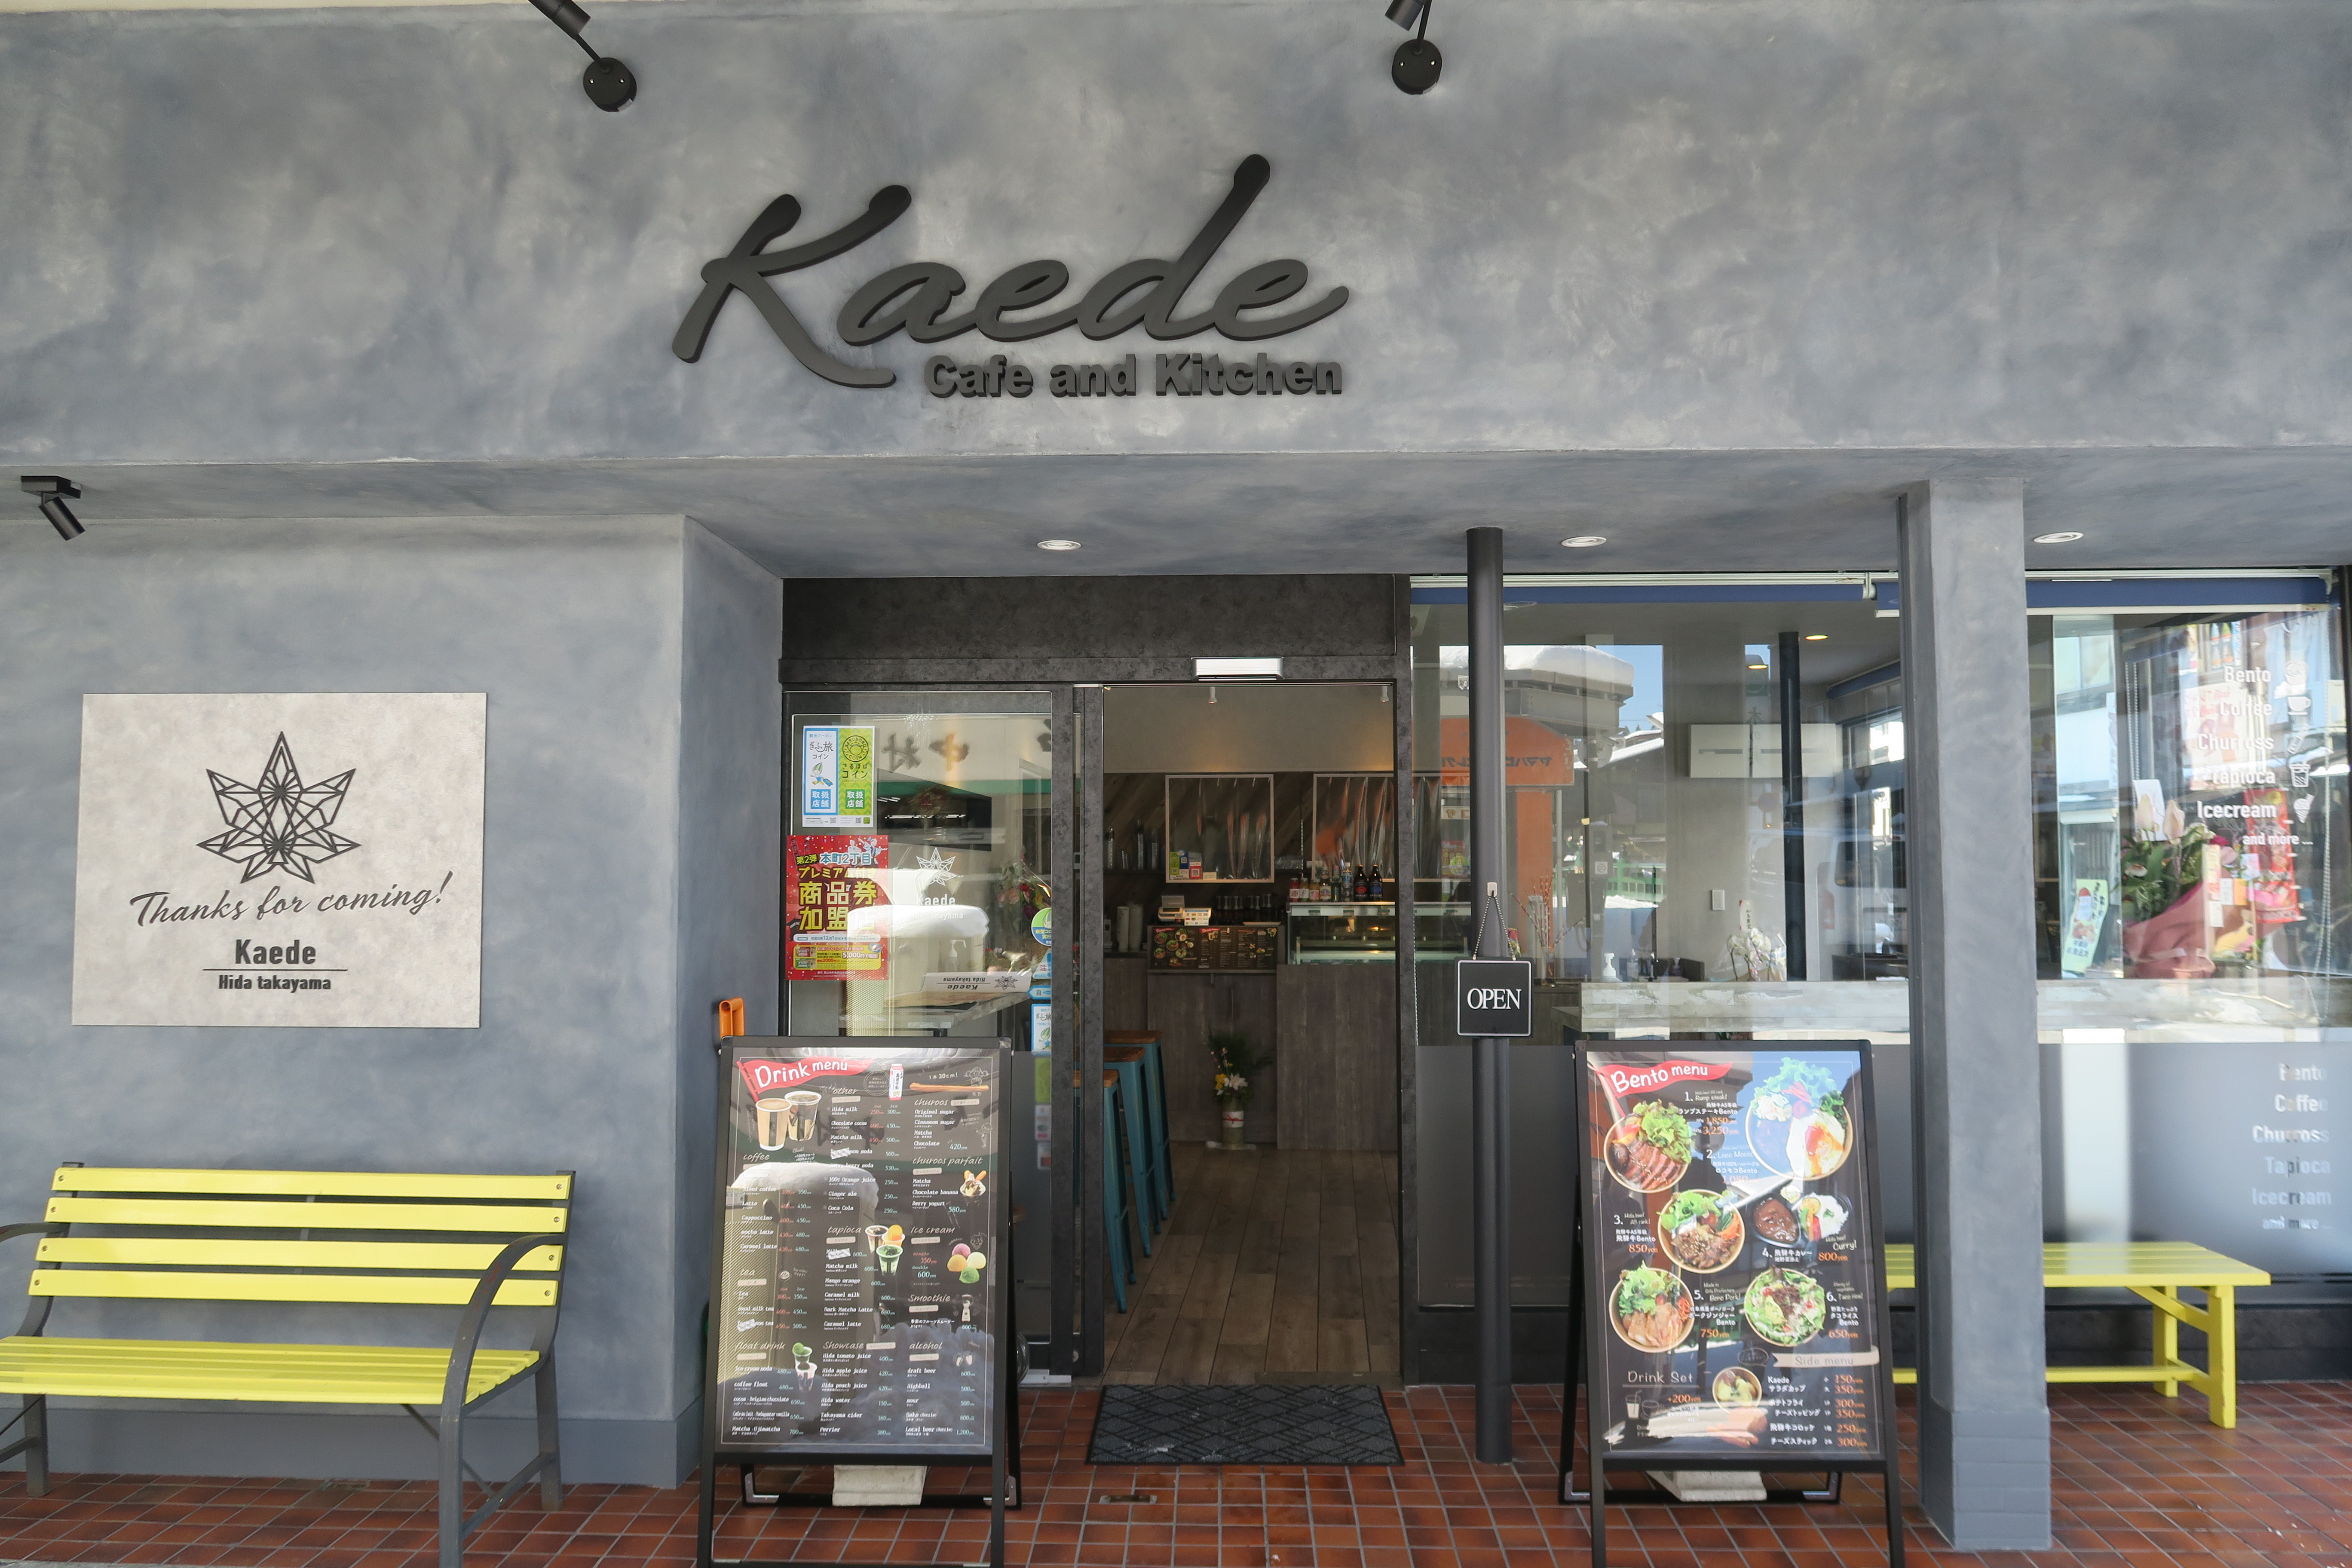 Kaede cafe and kitchen